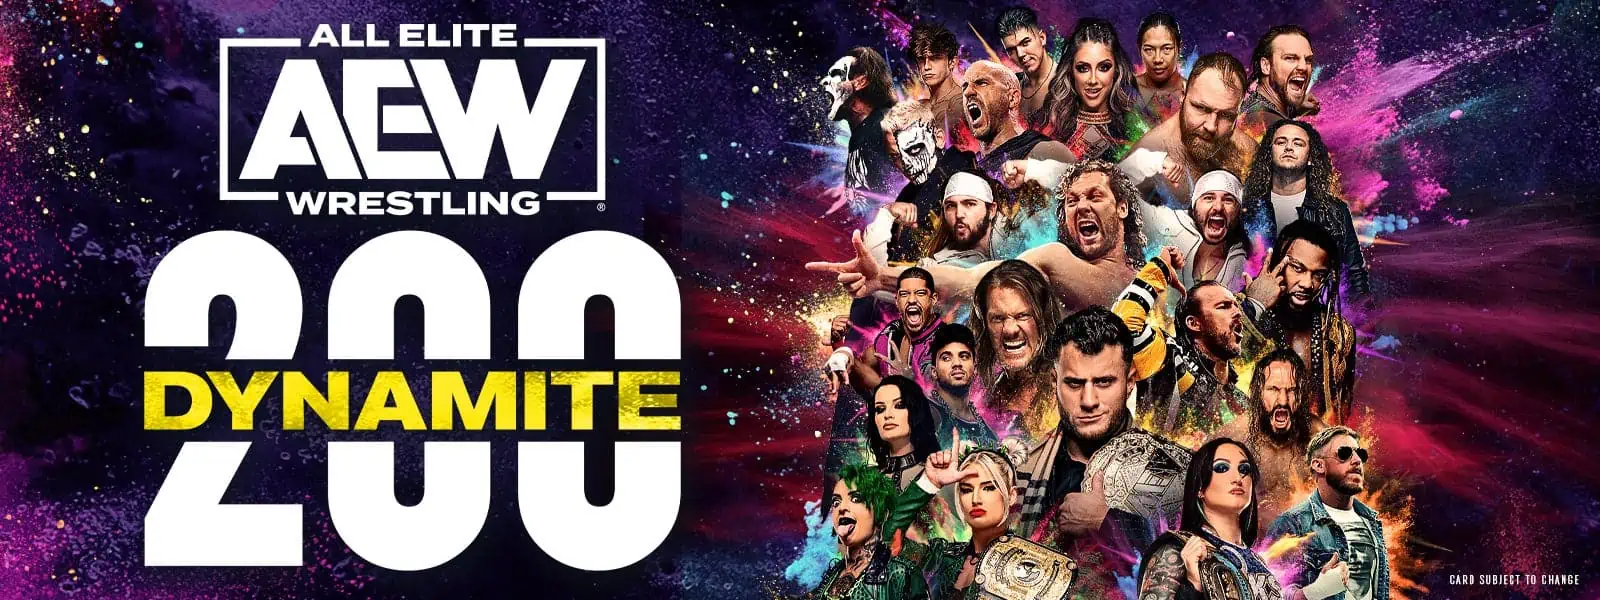 AEW Dynamite Rampage at The Yuengling Center